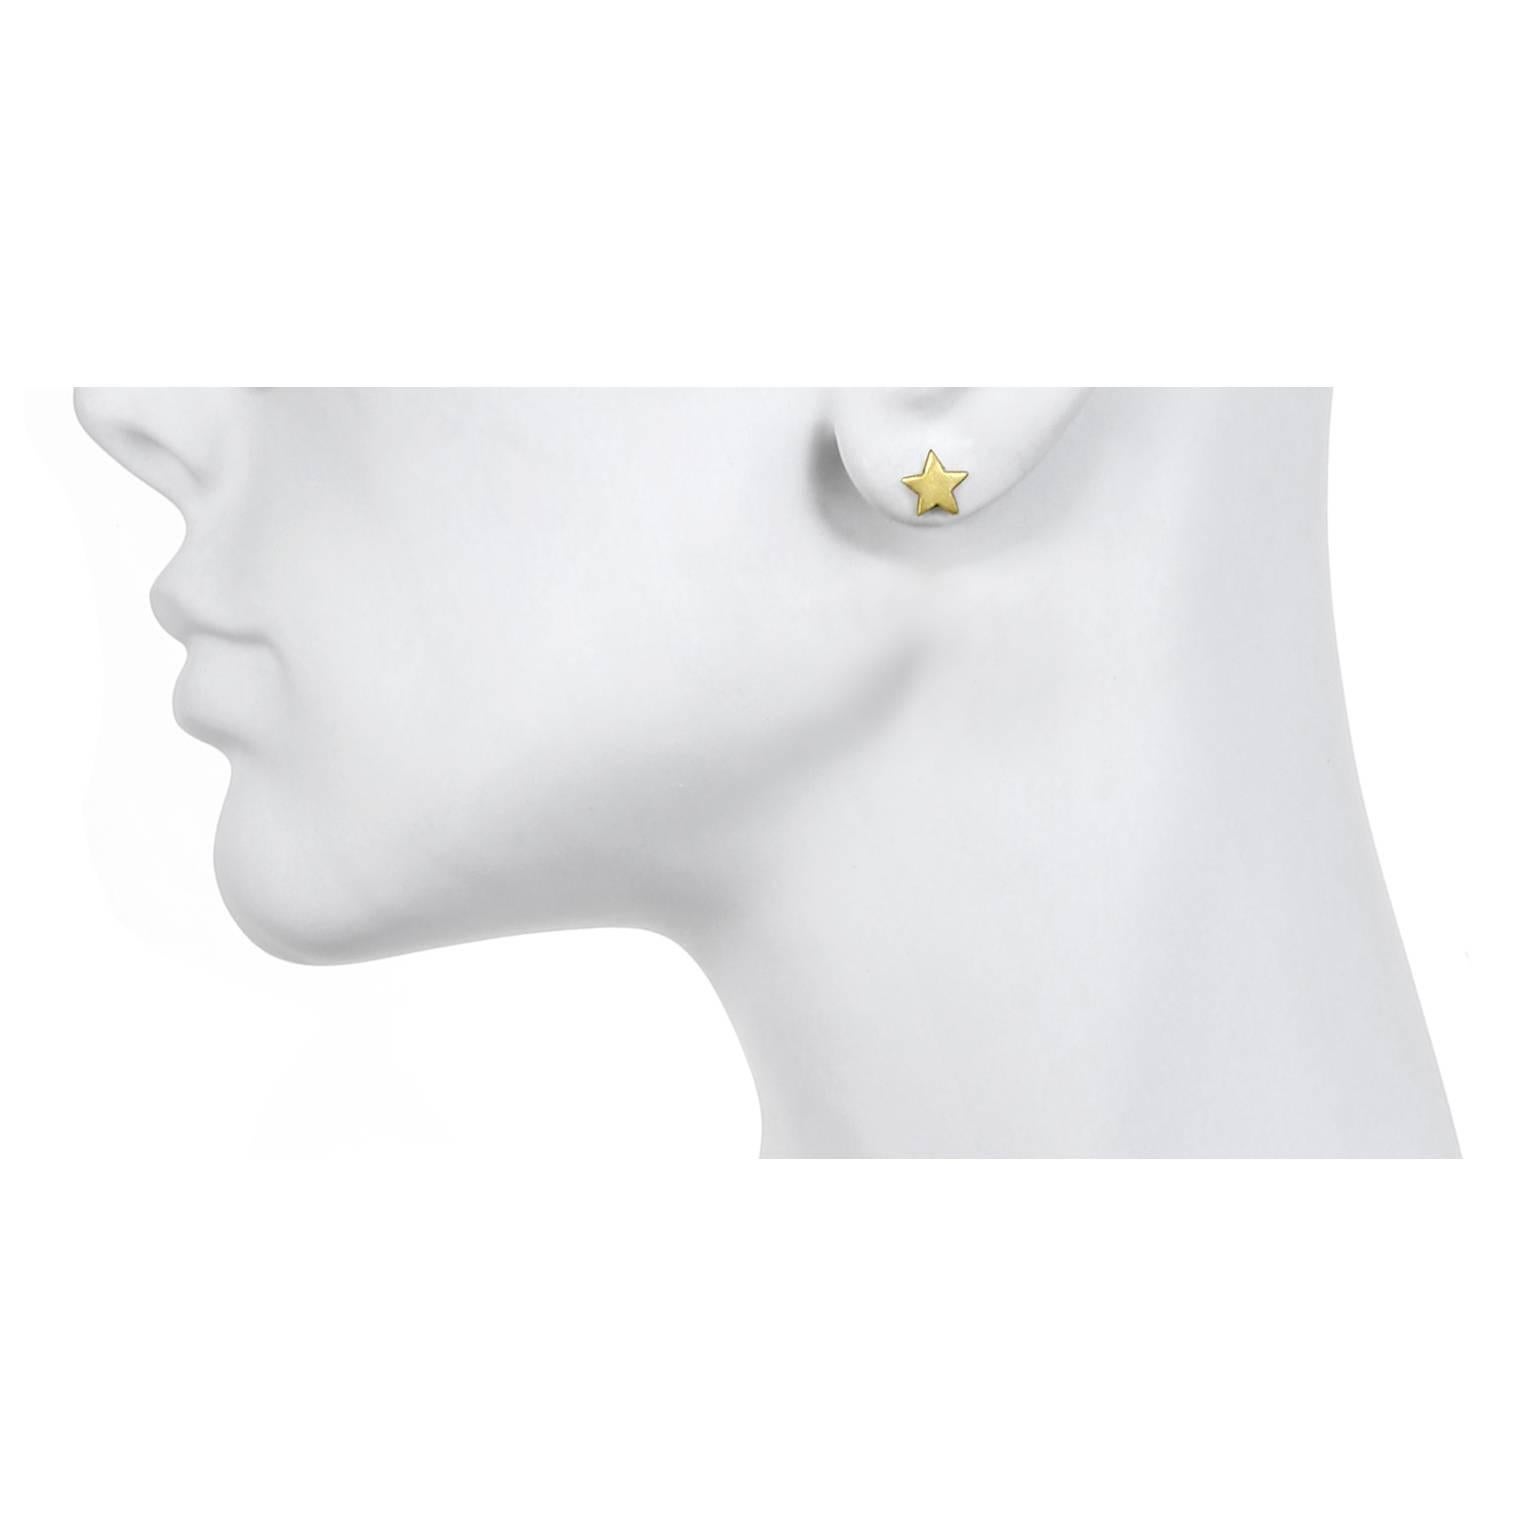 Faye Kim 18k Gold Moon and Star Stud Earrings
Let the moon and stars shine brightly on your ears with these uniquely designed earrings in 18k gold.   Matte finished.

Length 8mm- 10mm 